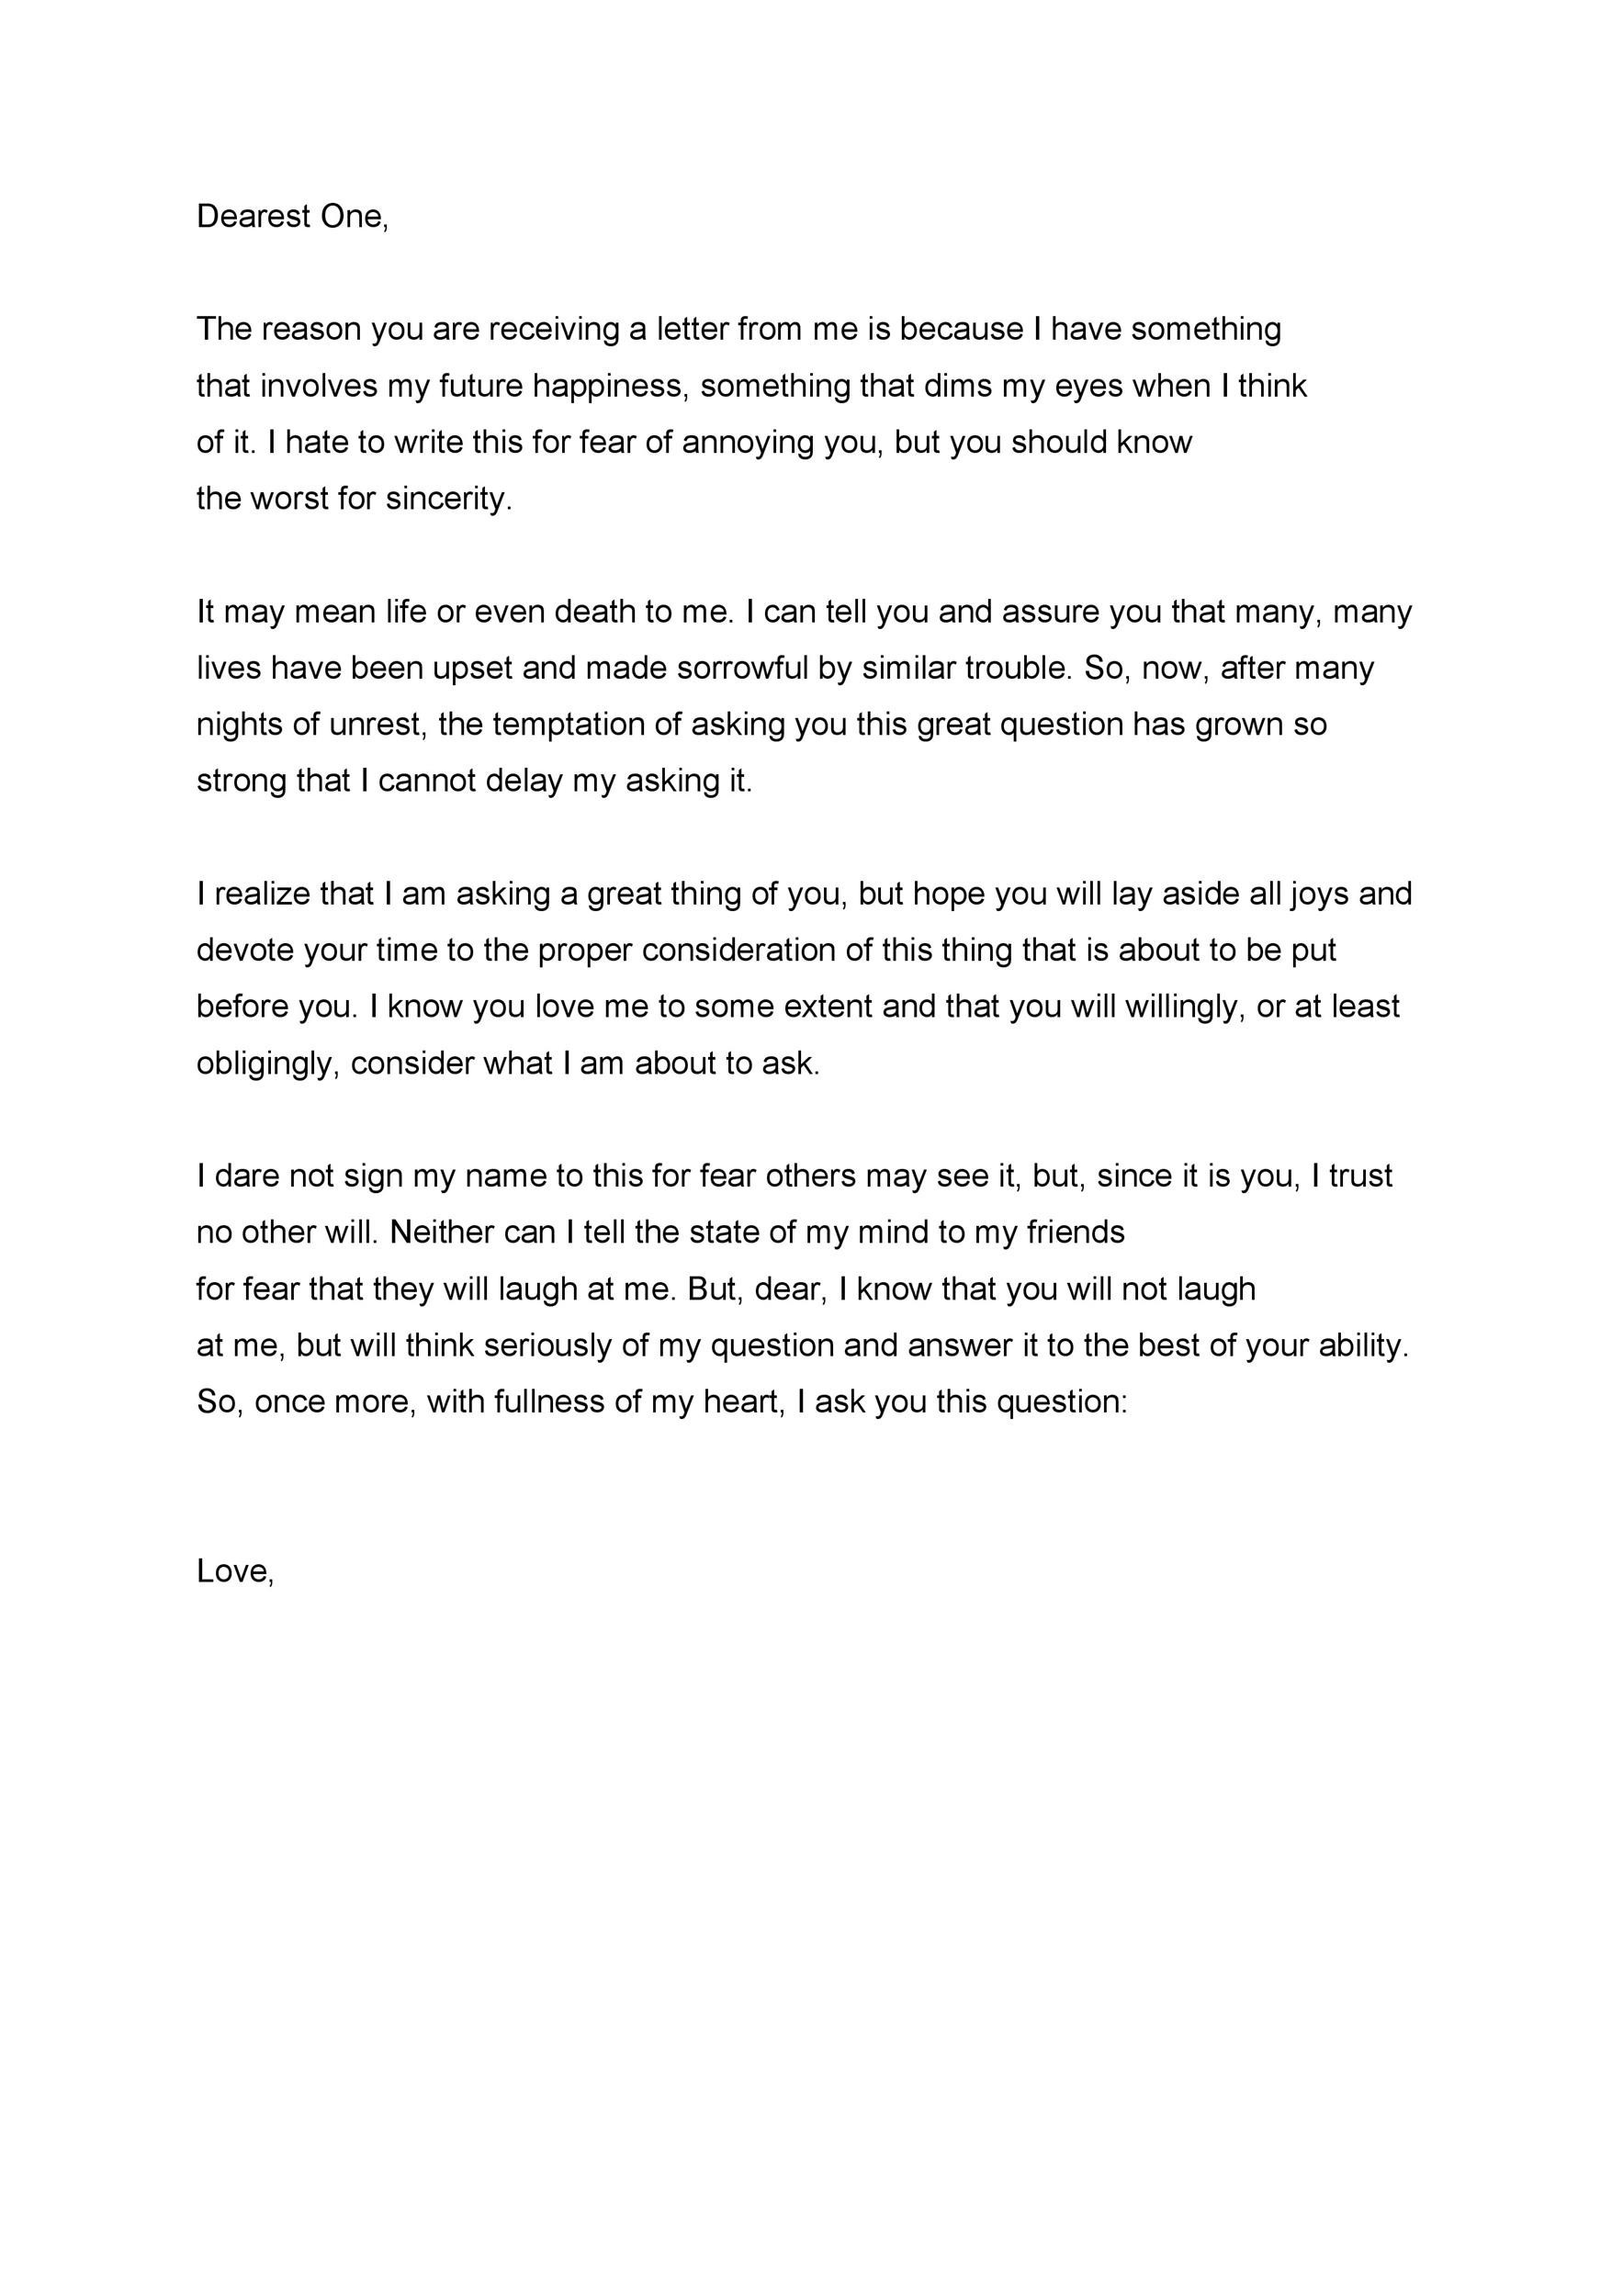 Letter To The One You Love from templatelab.com